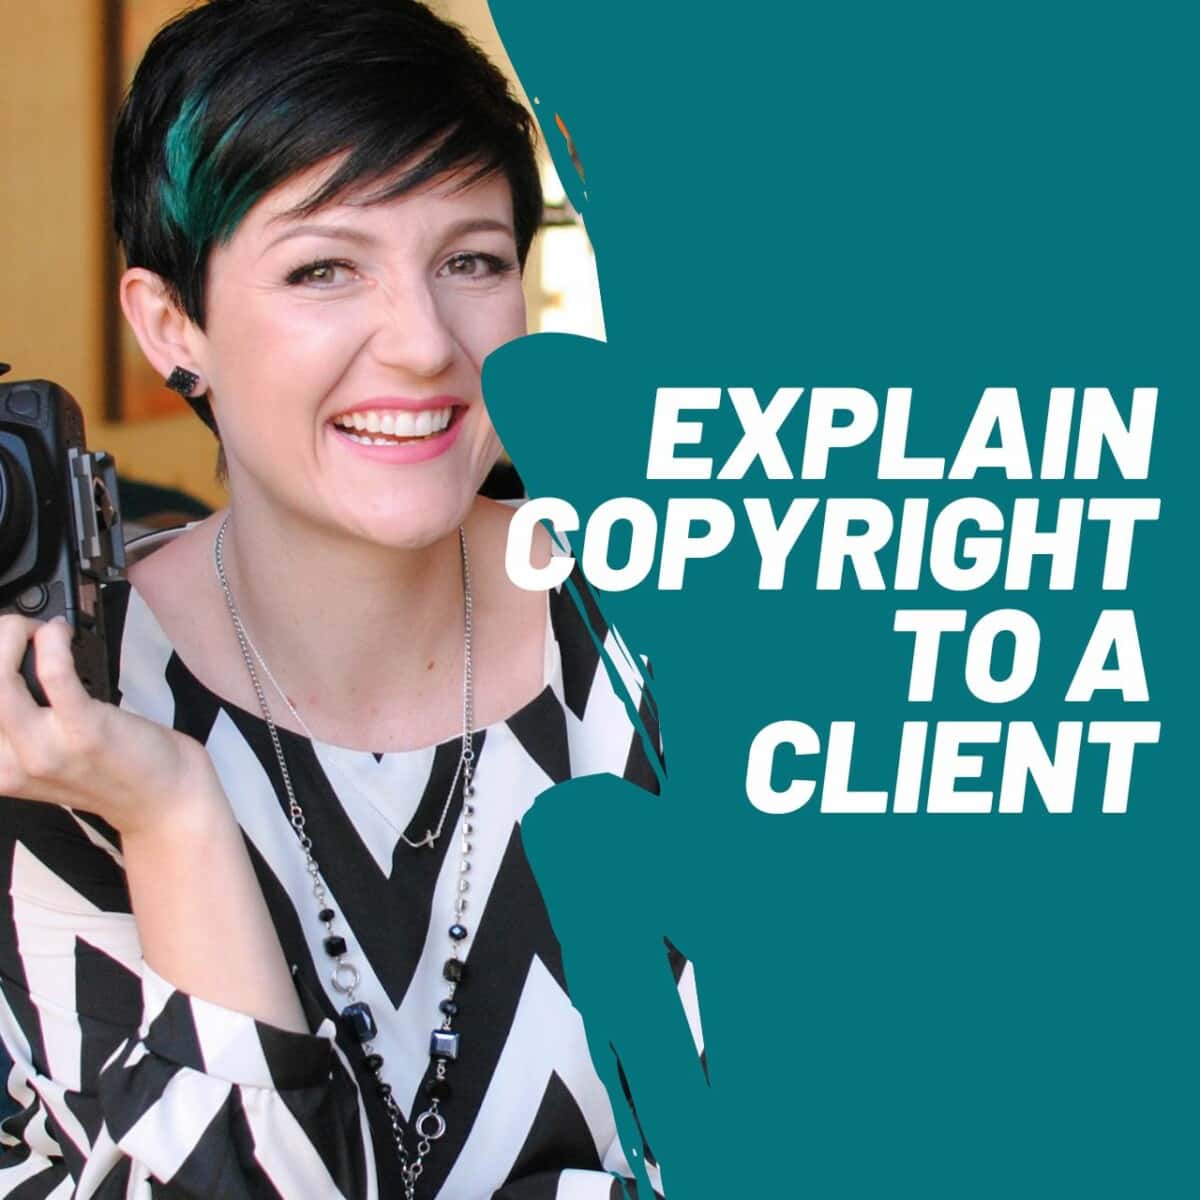 How to Explain Copyright to a Client